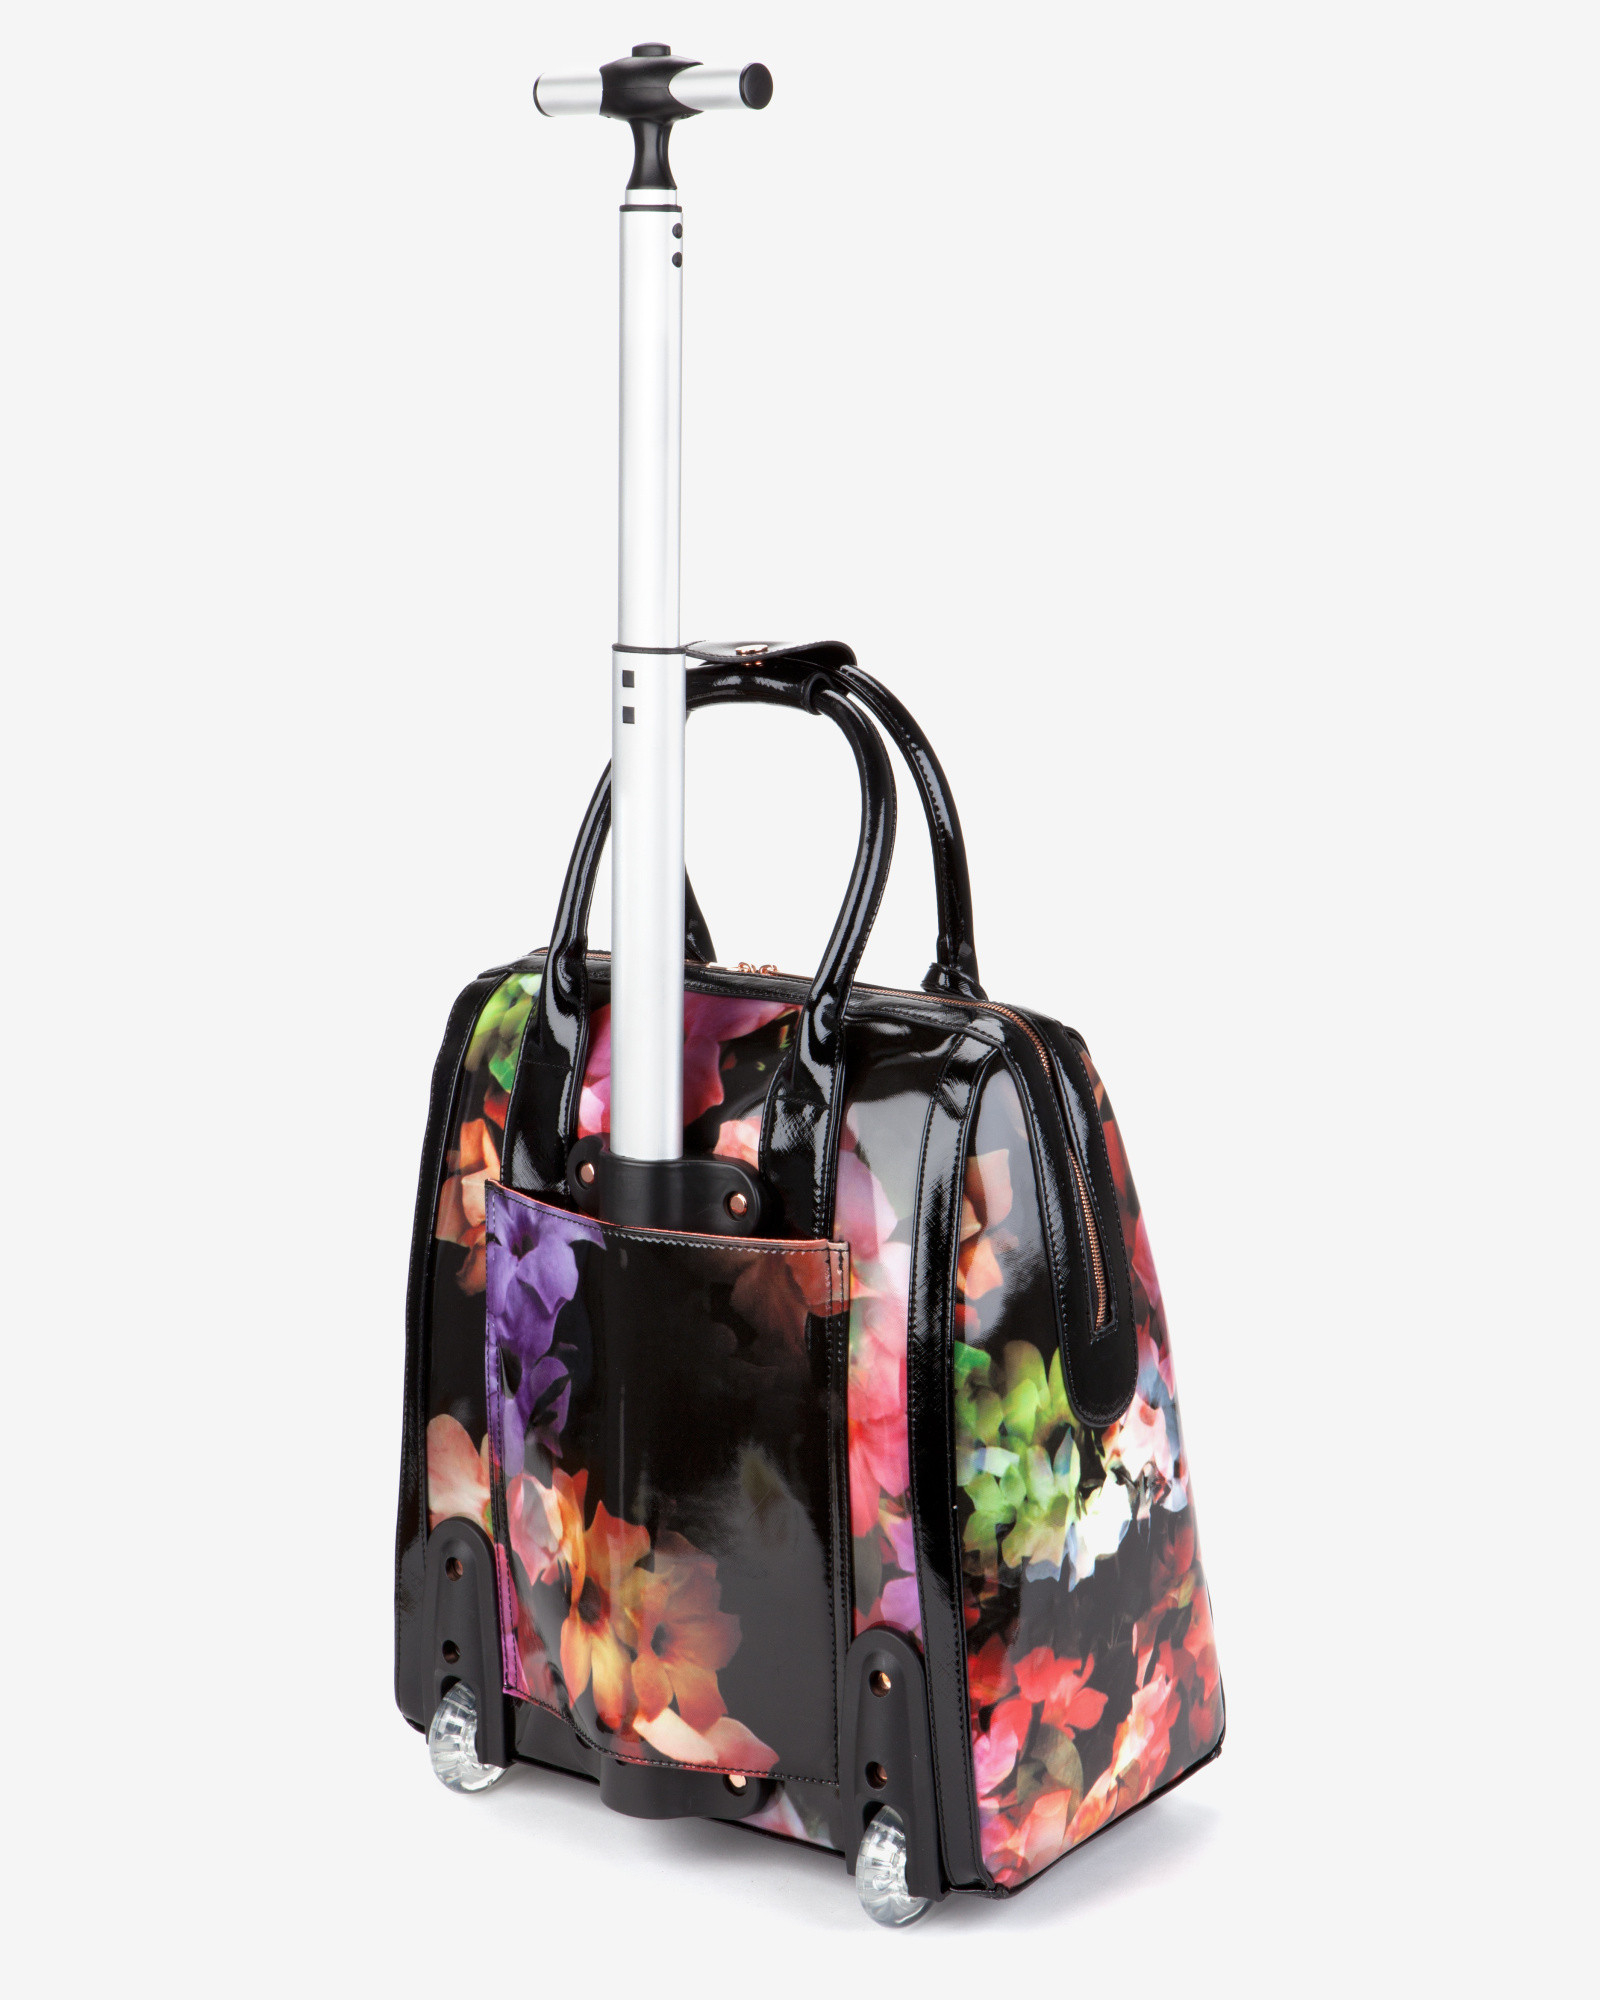 Ted Baker Women's Connie Cascading Floral Travel Bag - Black